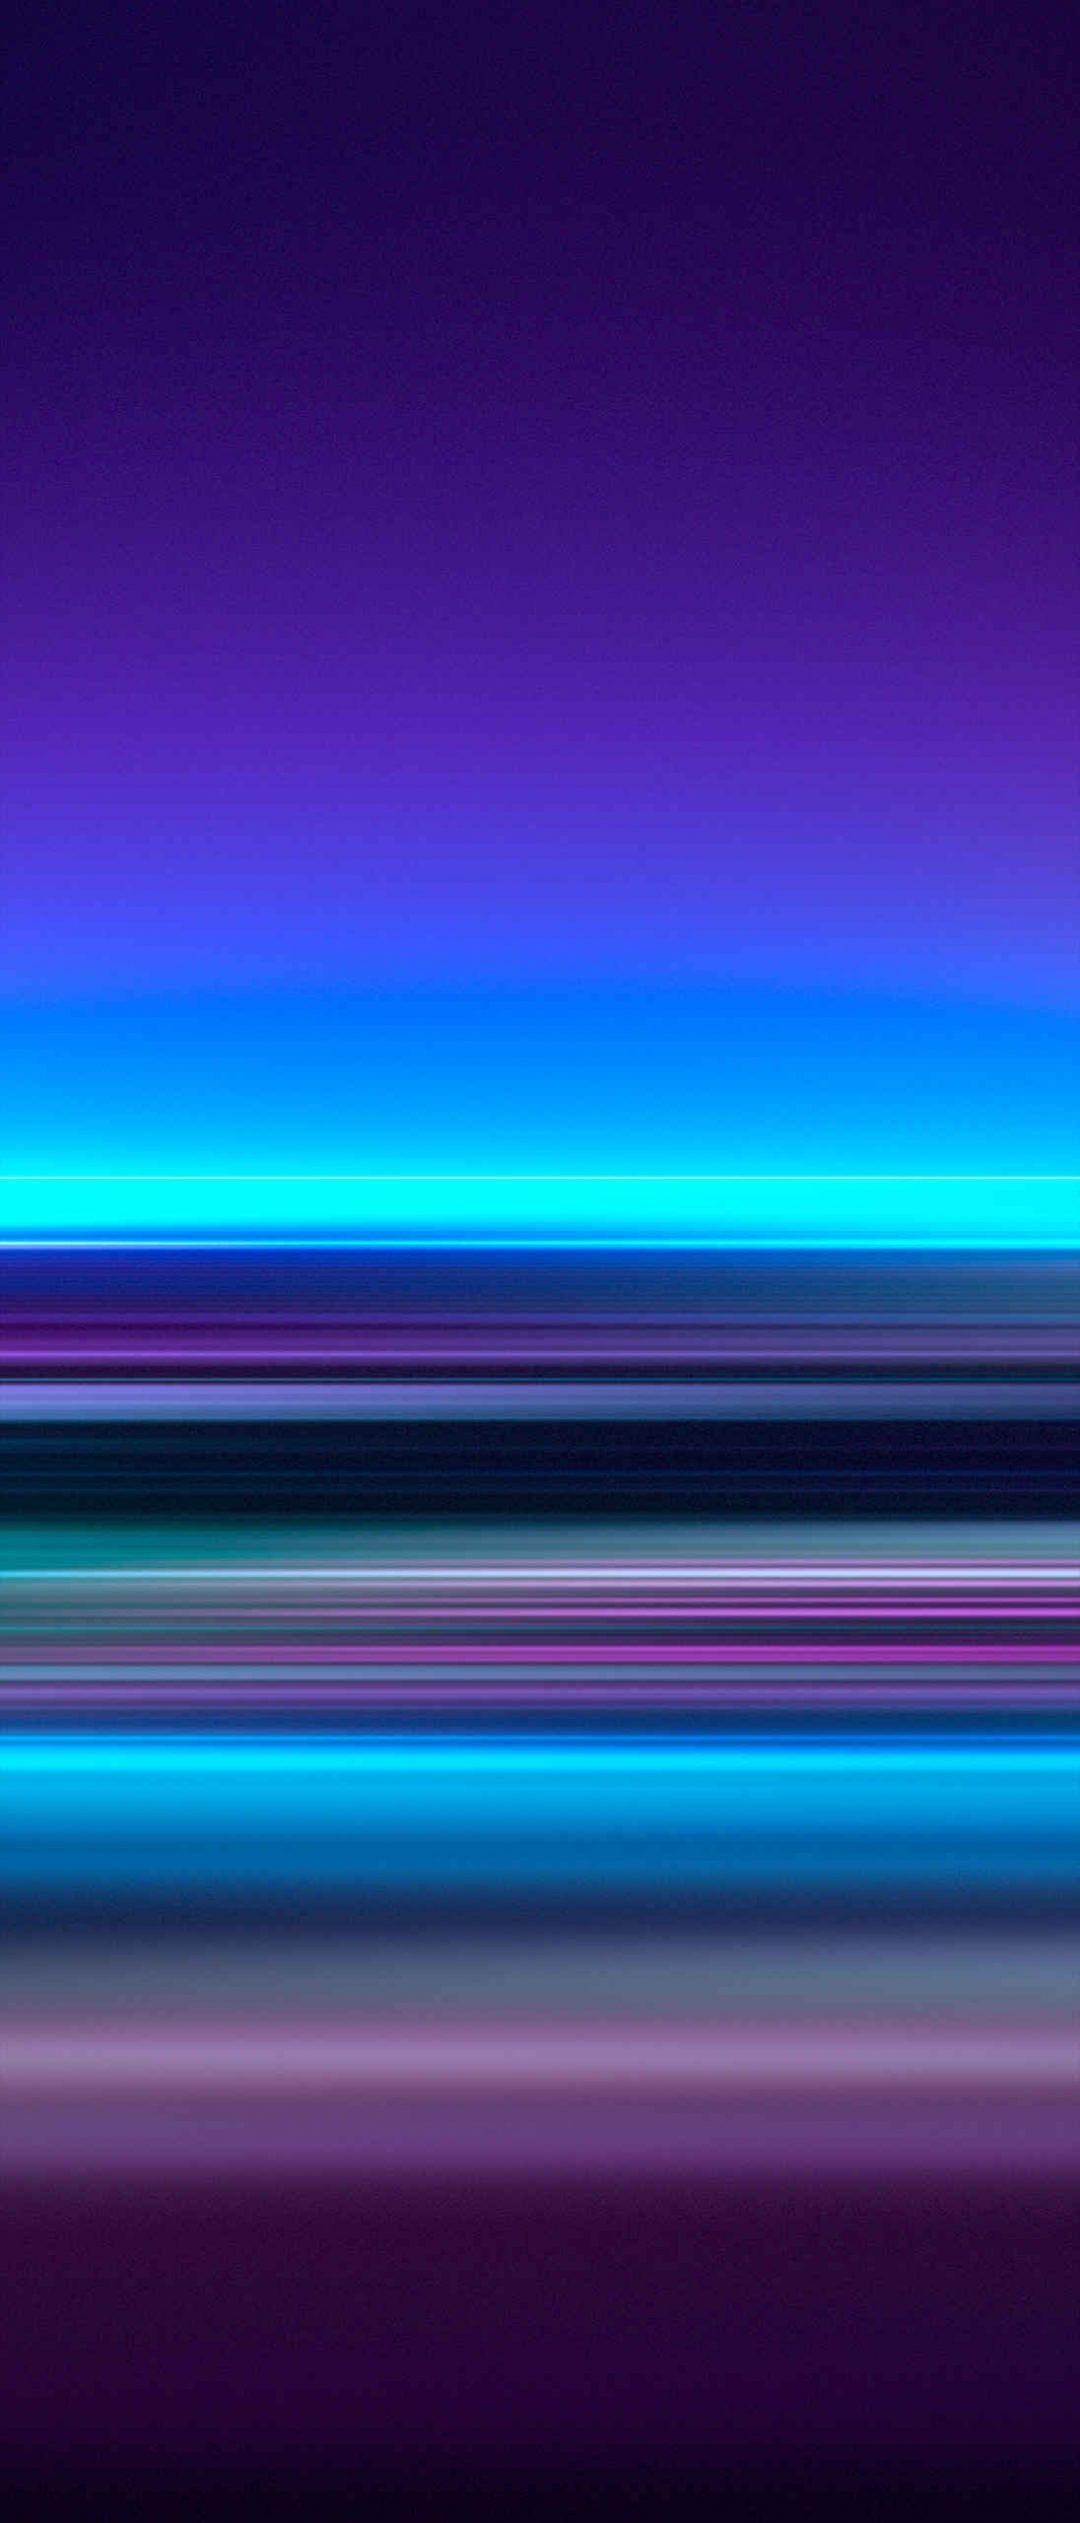 Sony Xperia 1 Ii Wallpapers Top Free Sony Xperia 1 Ii Backgrounds Wallpaperaccess